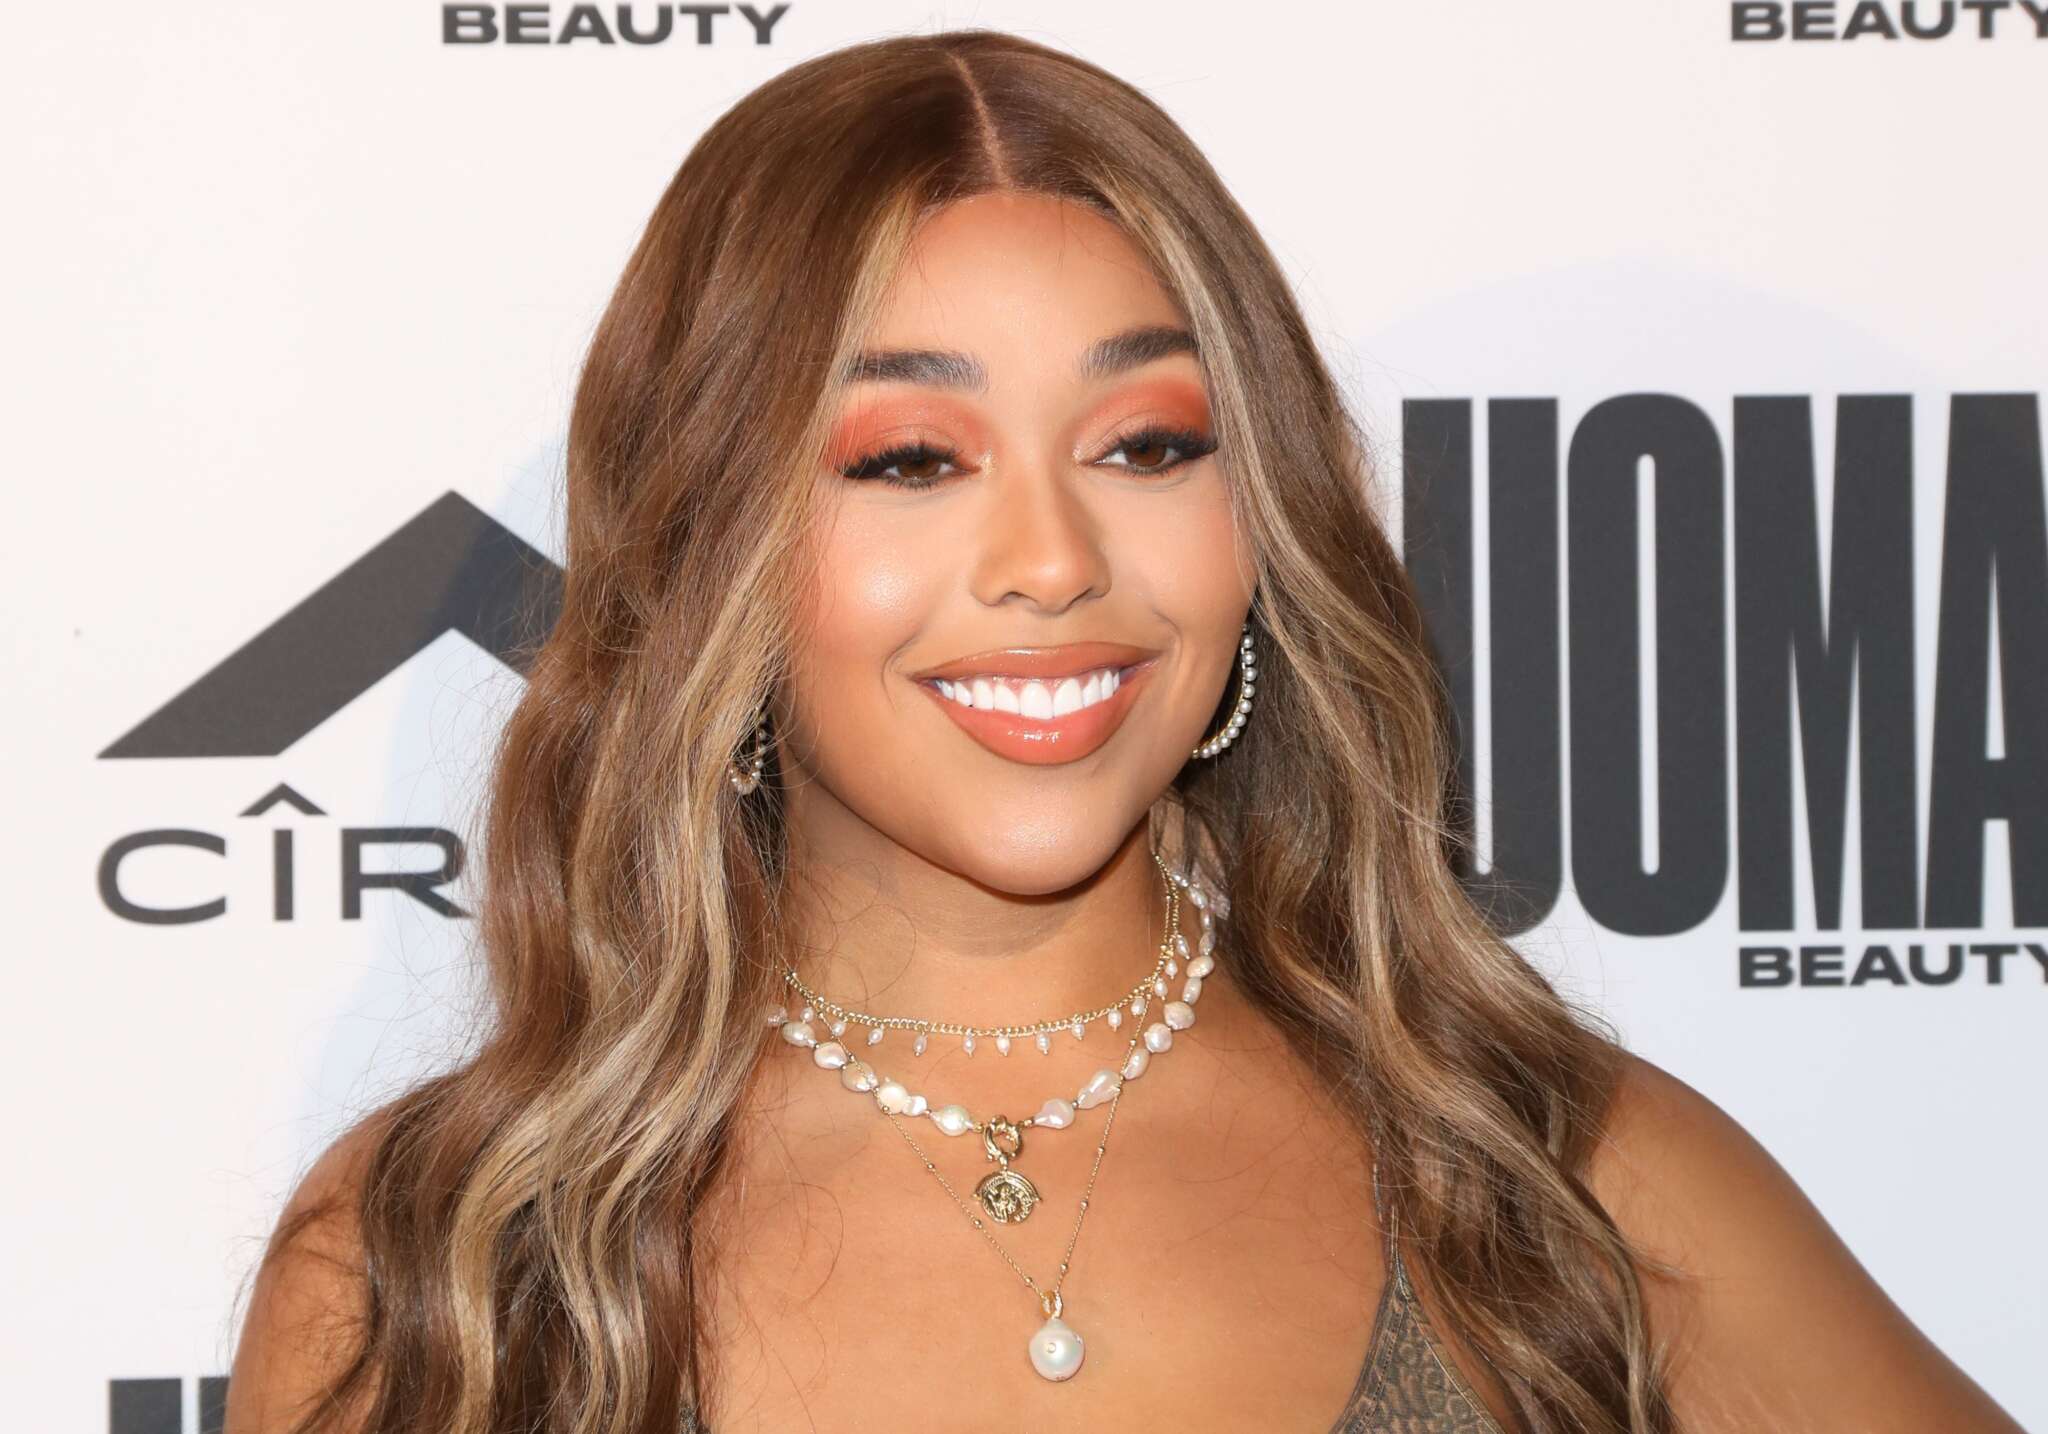 Jordyn Woods Shares Footage From Her Sister, Jodie's Birthday Celebration But Fans Notice Something Strange - Check Out What They Say